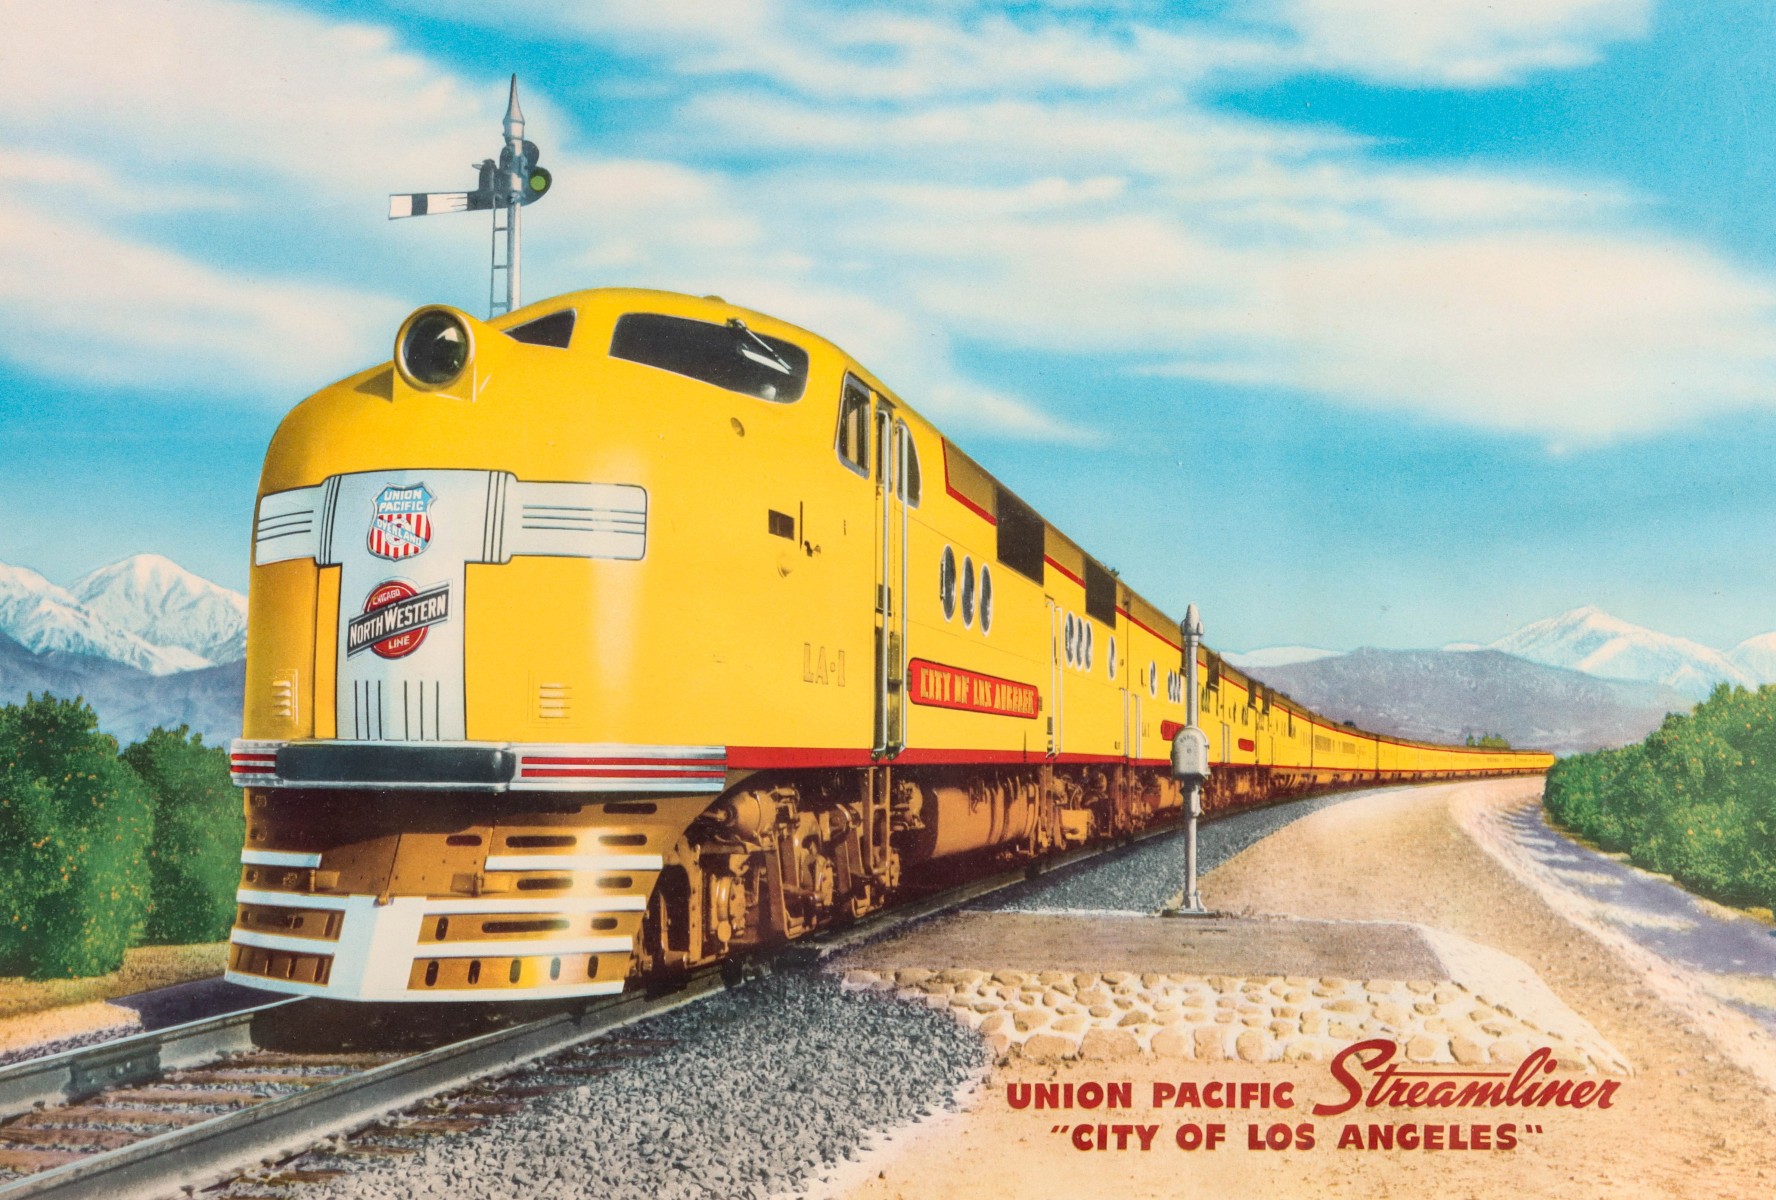 A UNION PACIFIC / CNW CITY OF LOS ANGELES POSTER